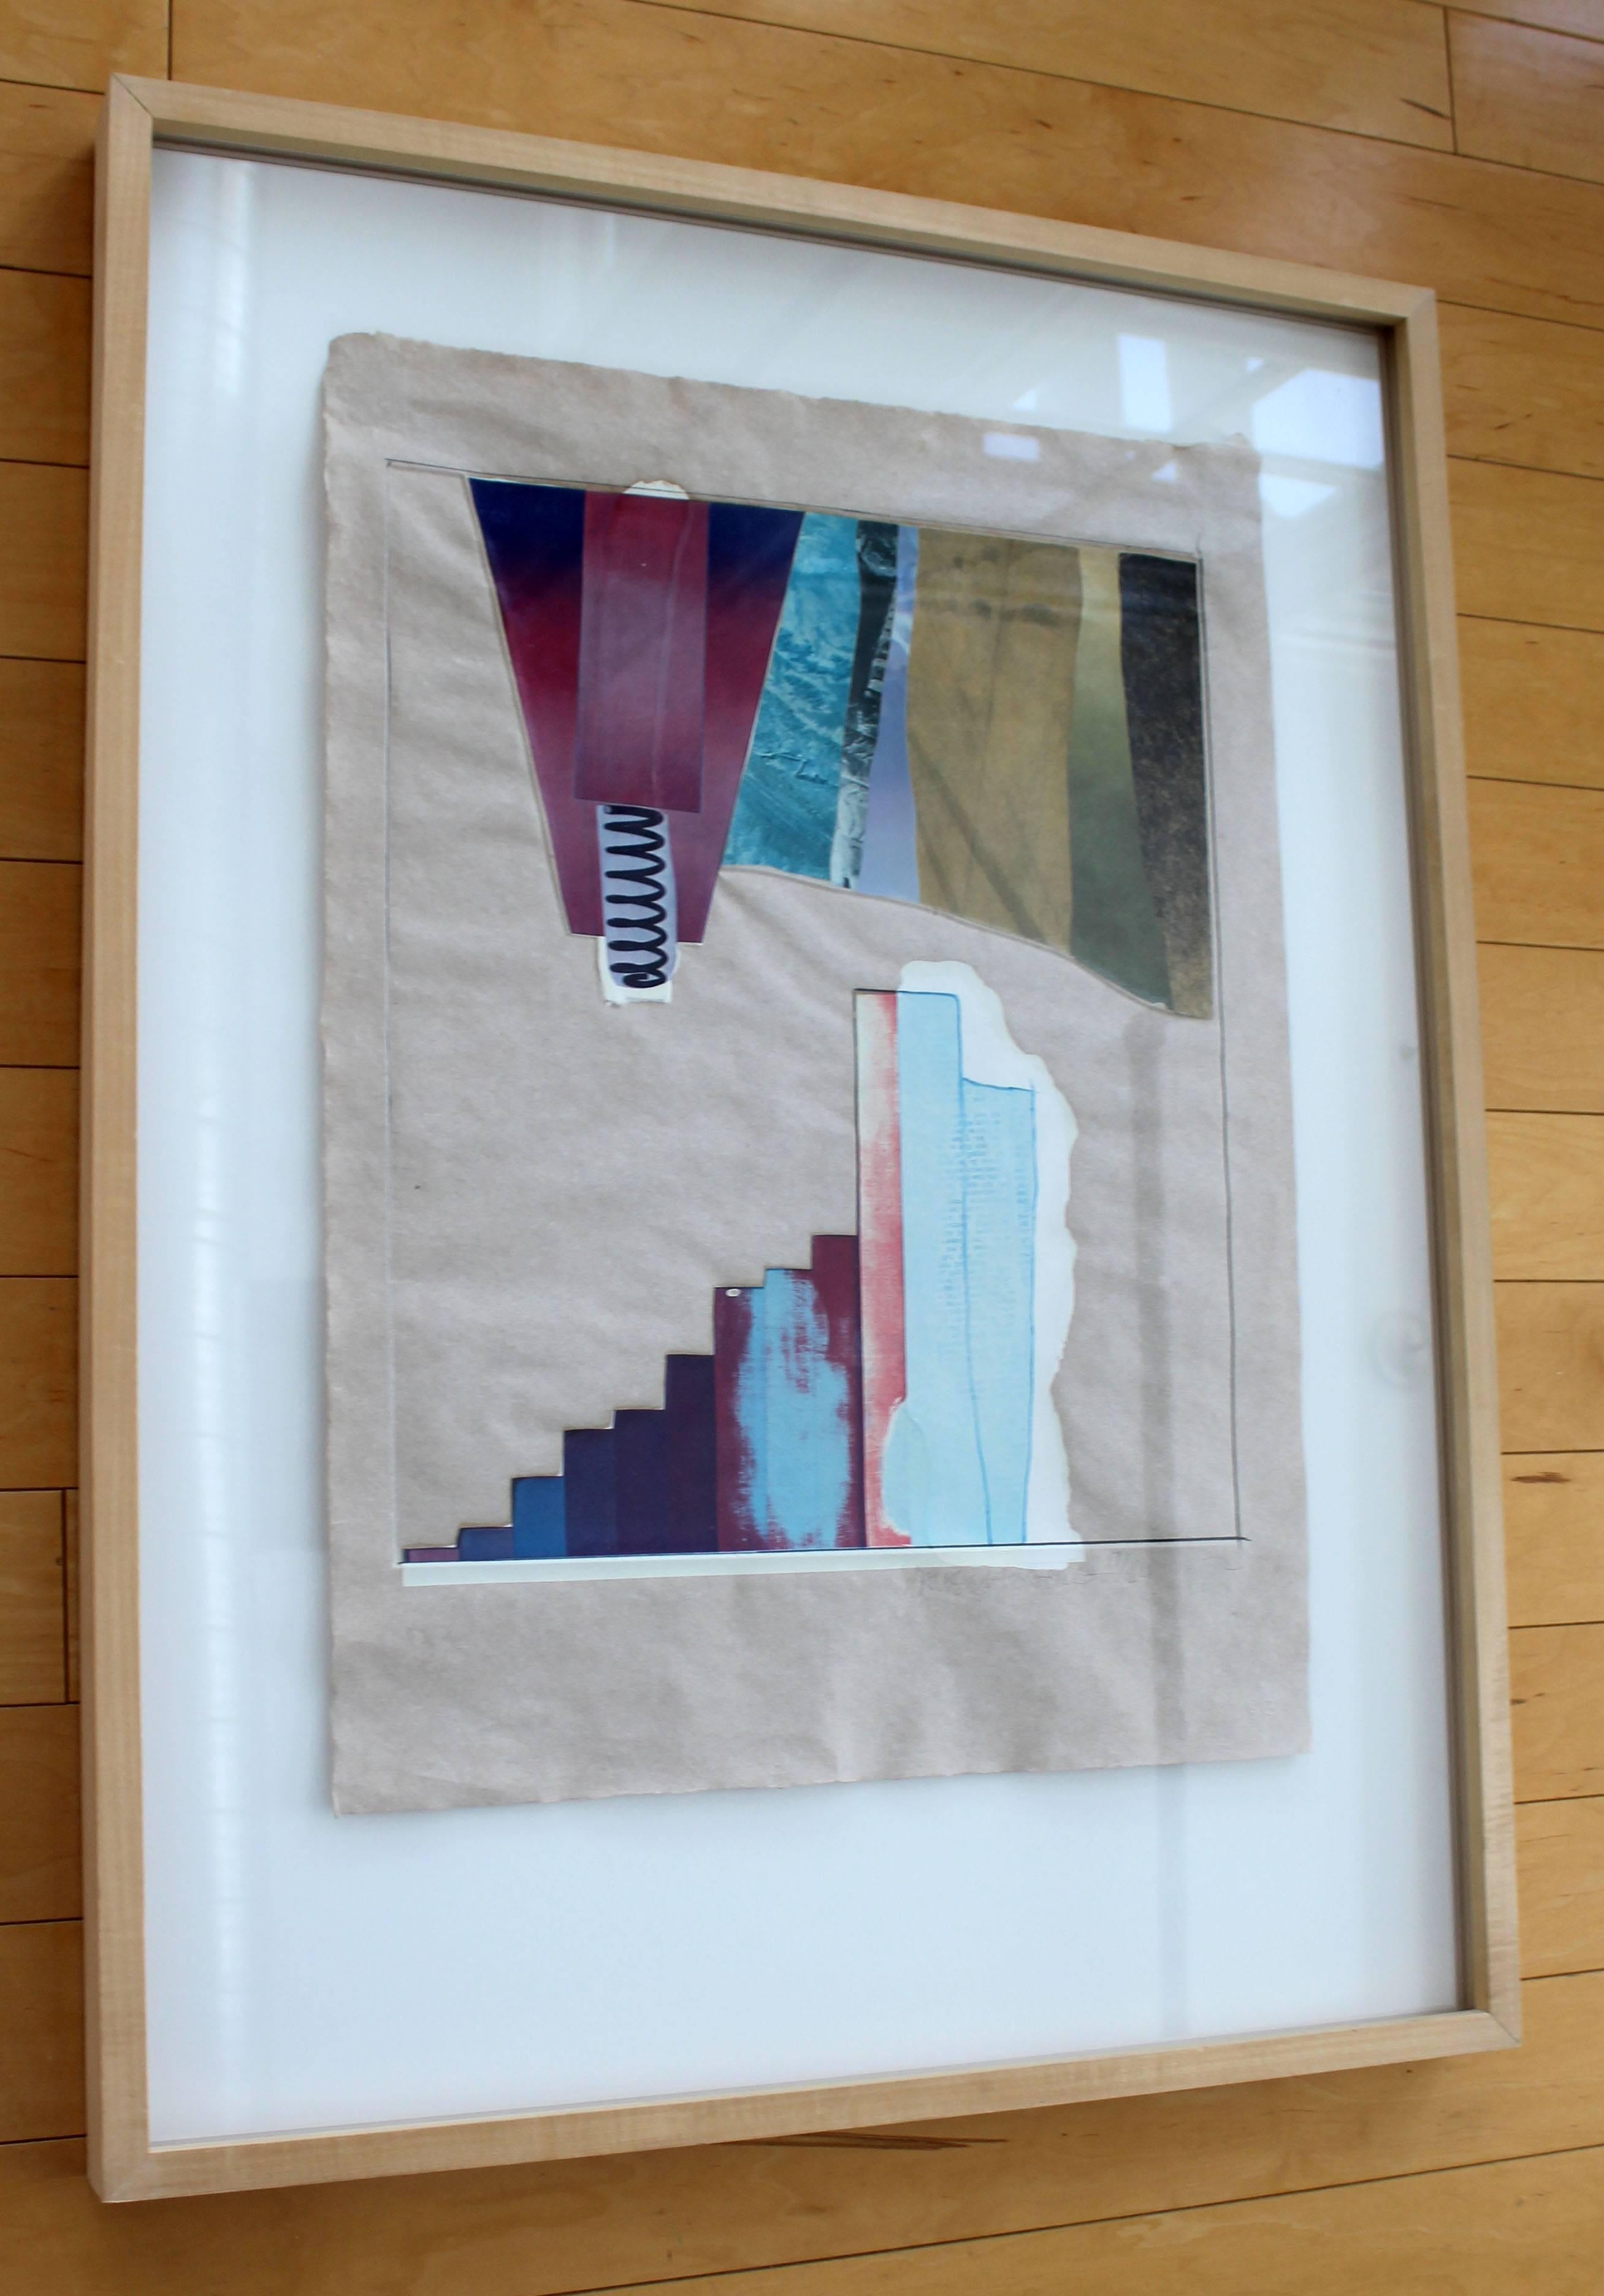 For your consideration is a magnificent, framed print by Robert Rauschenberg, signed, dated 1972 and numbered 17/84. 